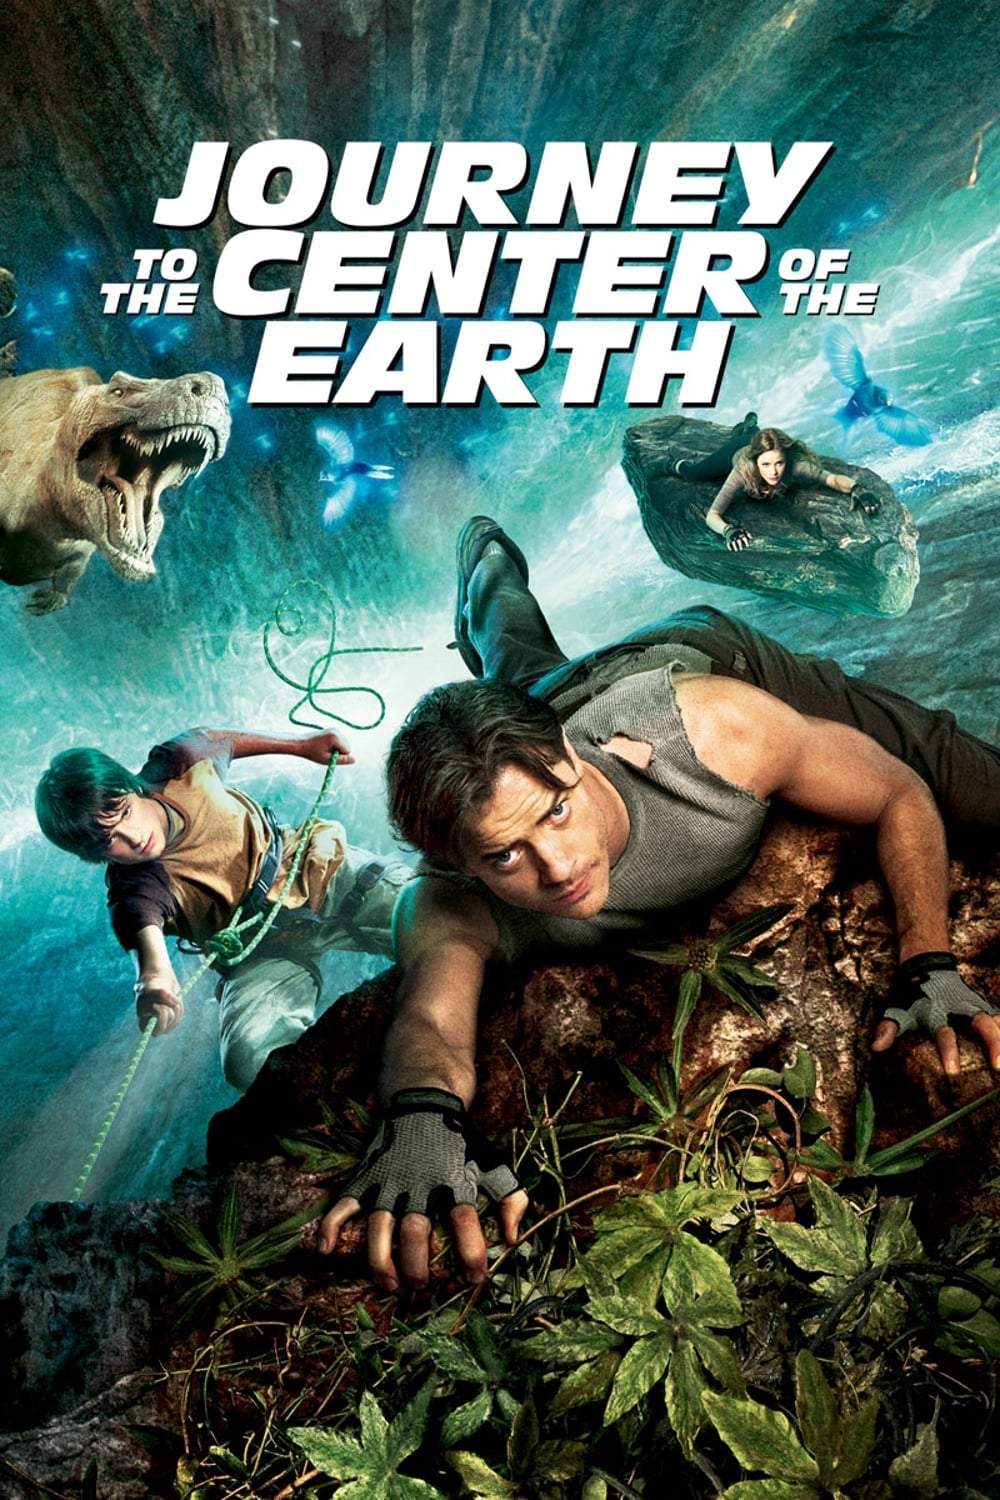 HBO FAMILY- JOURNEY TO THE CENTER OF THE EARTH